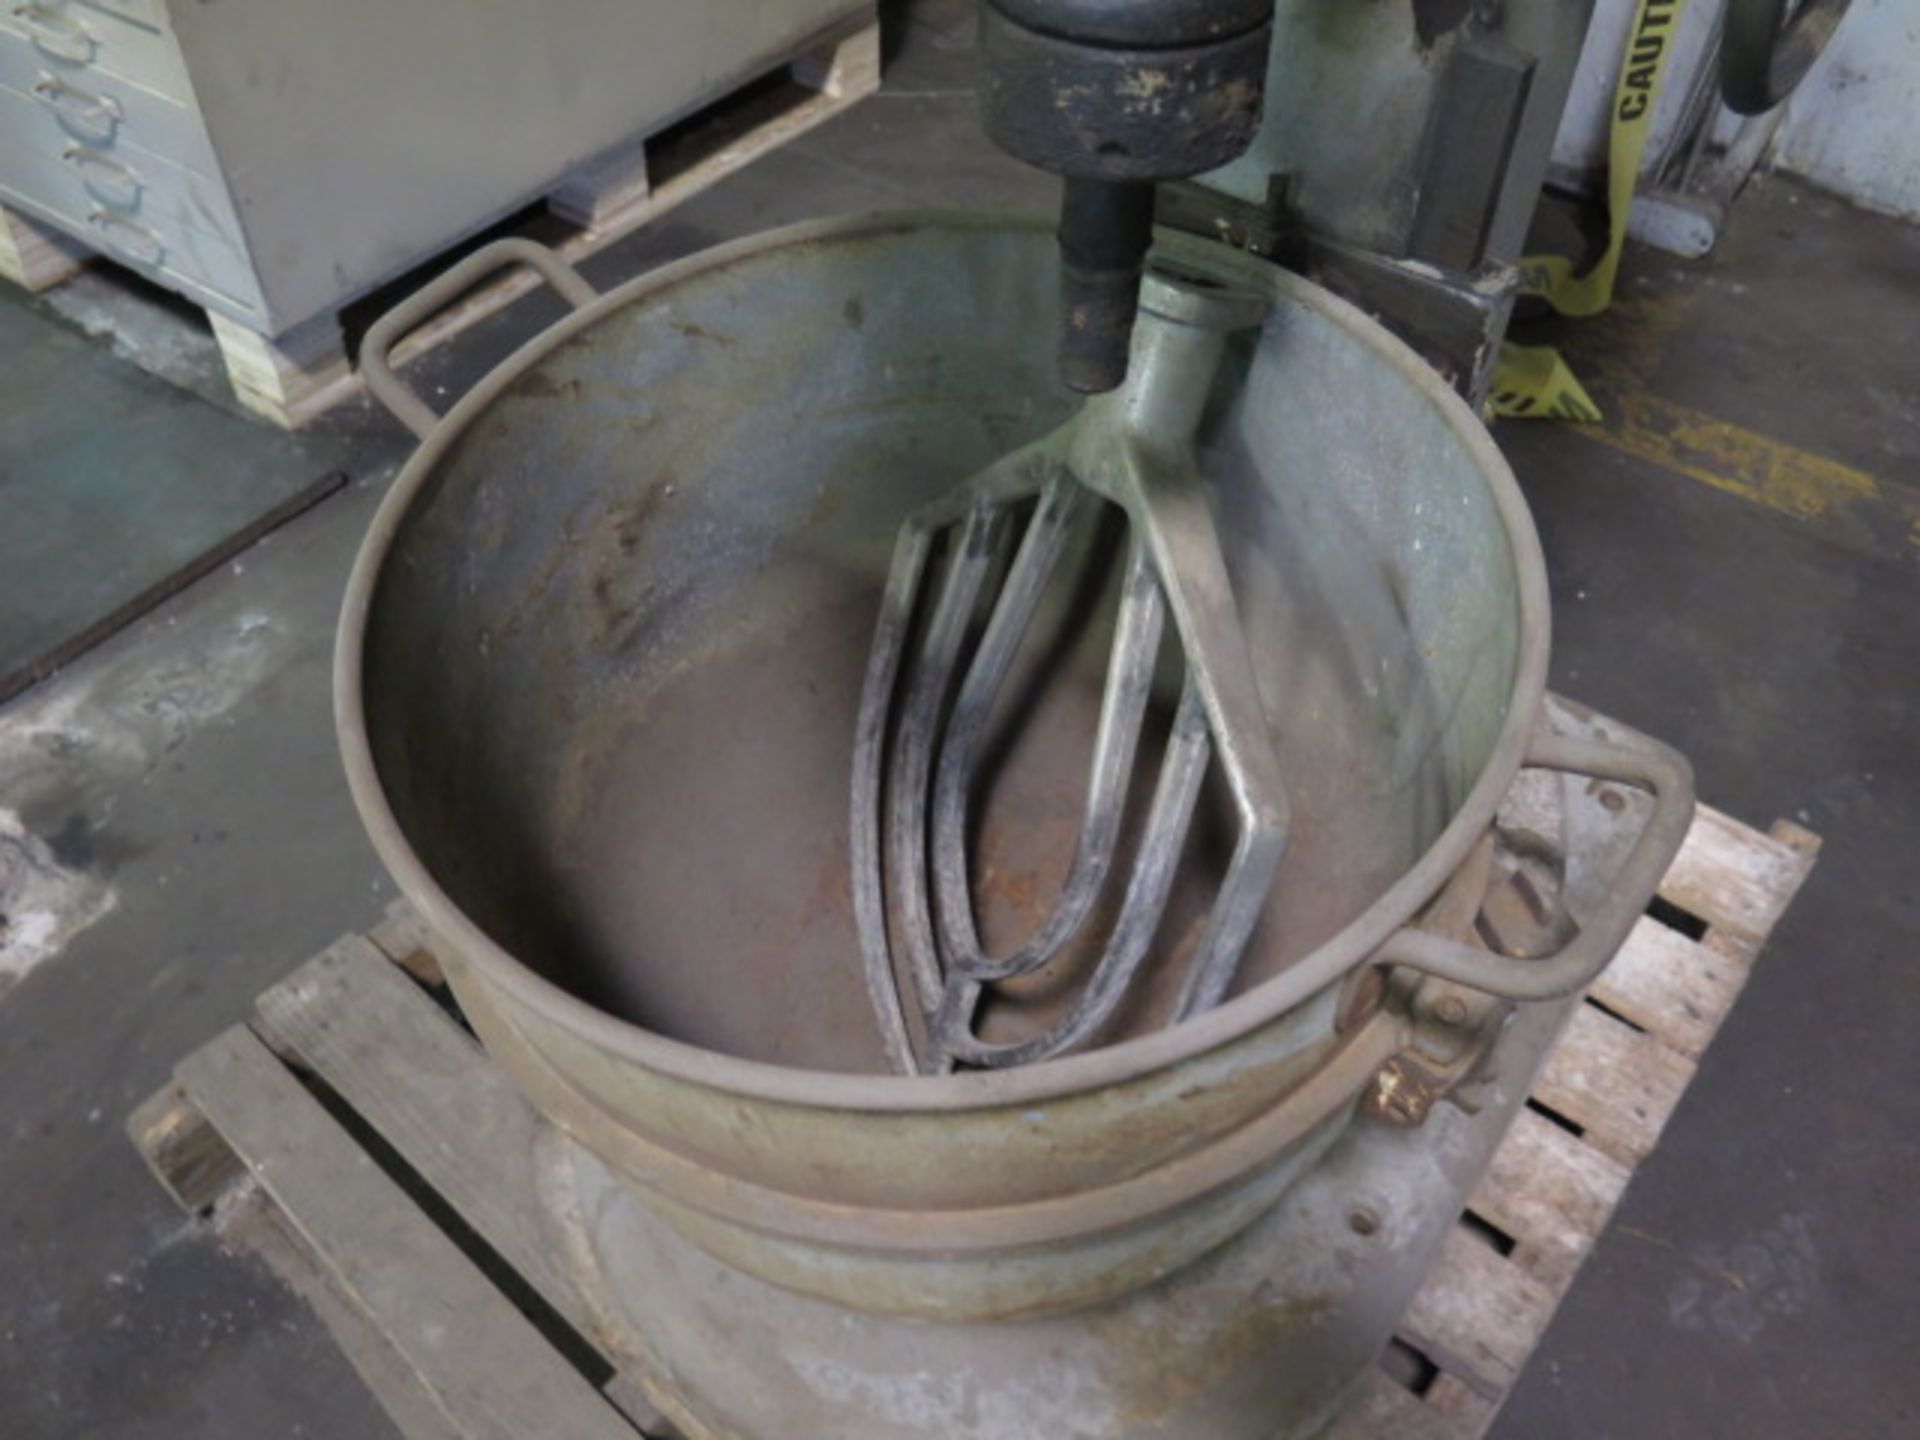 Hobart mdl. S-601 Industrial Mixer s/n 1001511 (SOLD AS-IS - NO WARRANTY) - Image 3 of 5